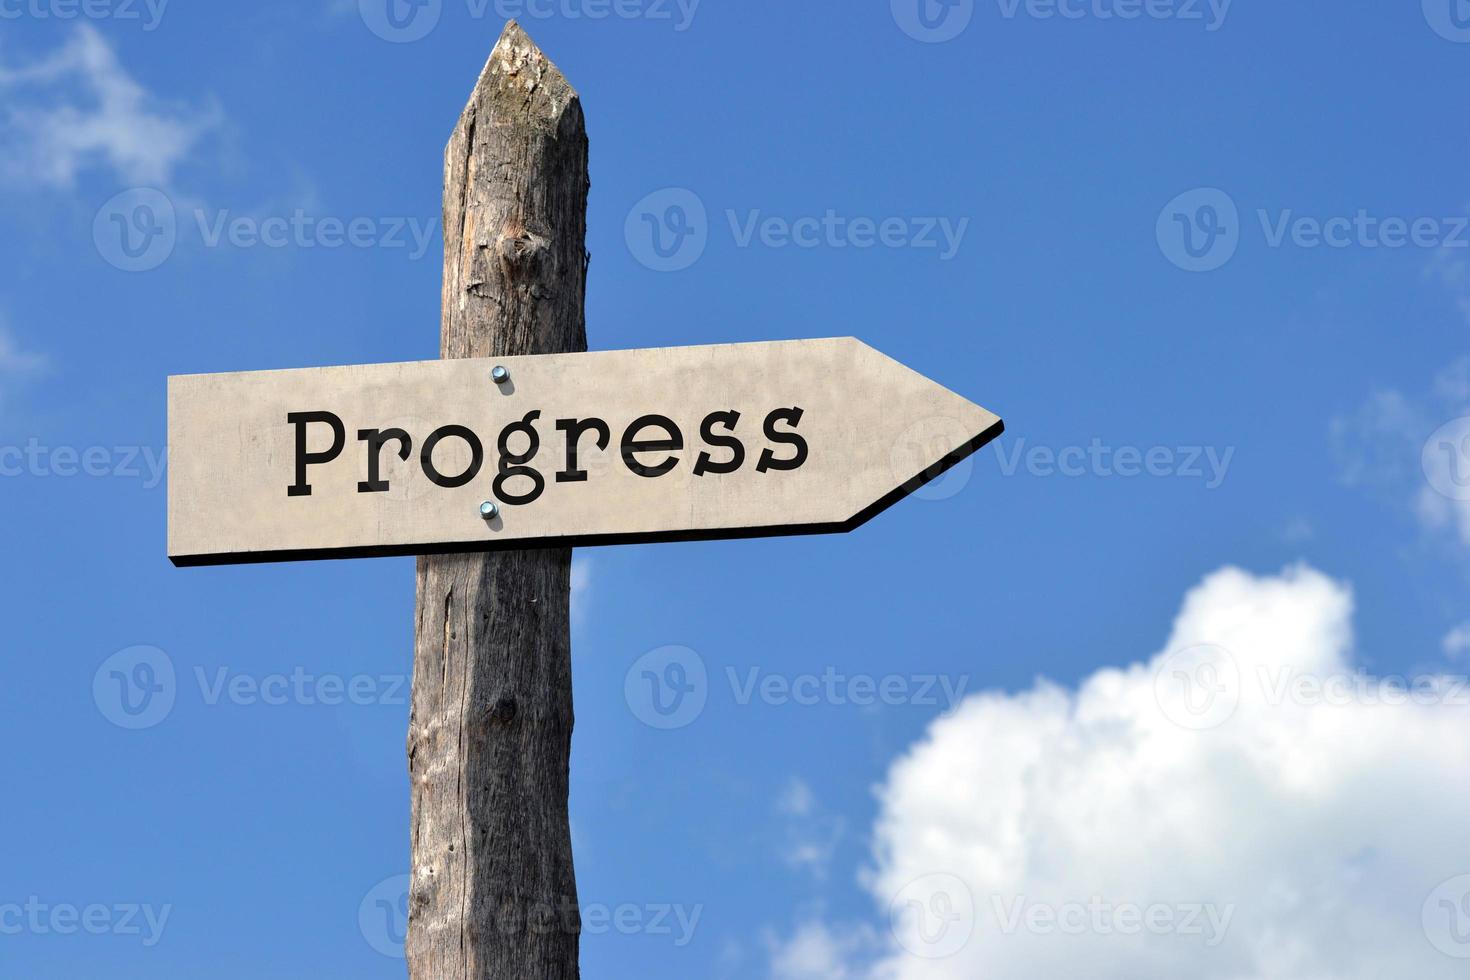 Progress - Wooden Signpost with one Arrow, Sky with Clouds photo